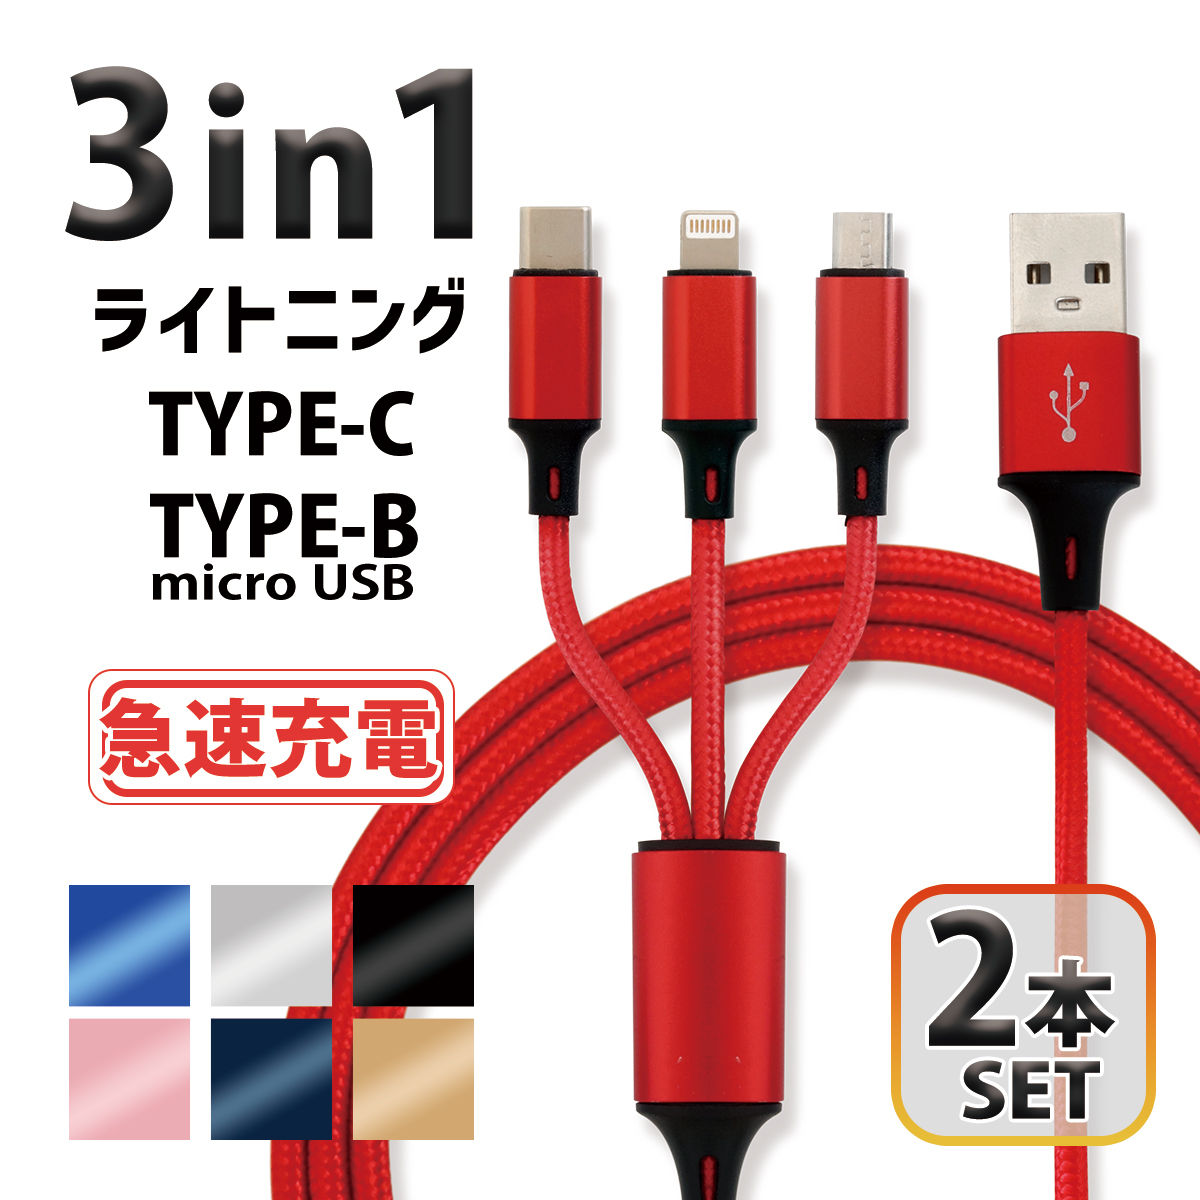 3in1 充電ケーブル iPhone android switch 赤 1.2m